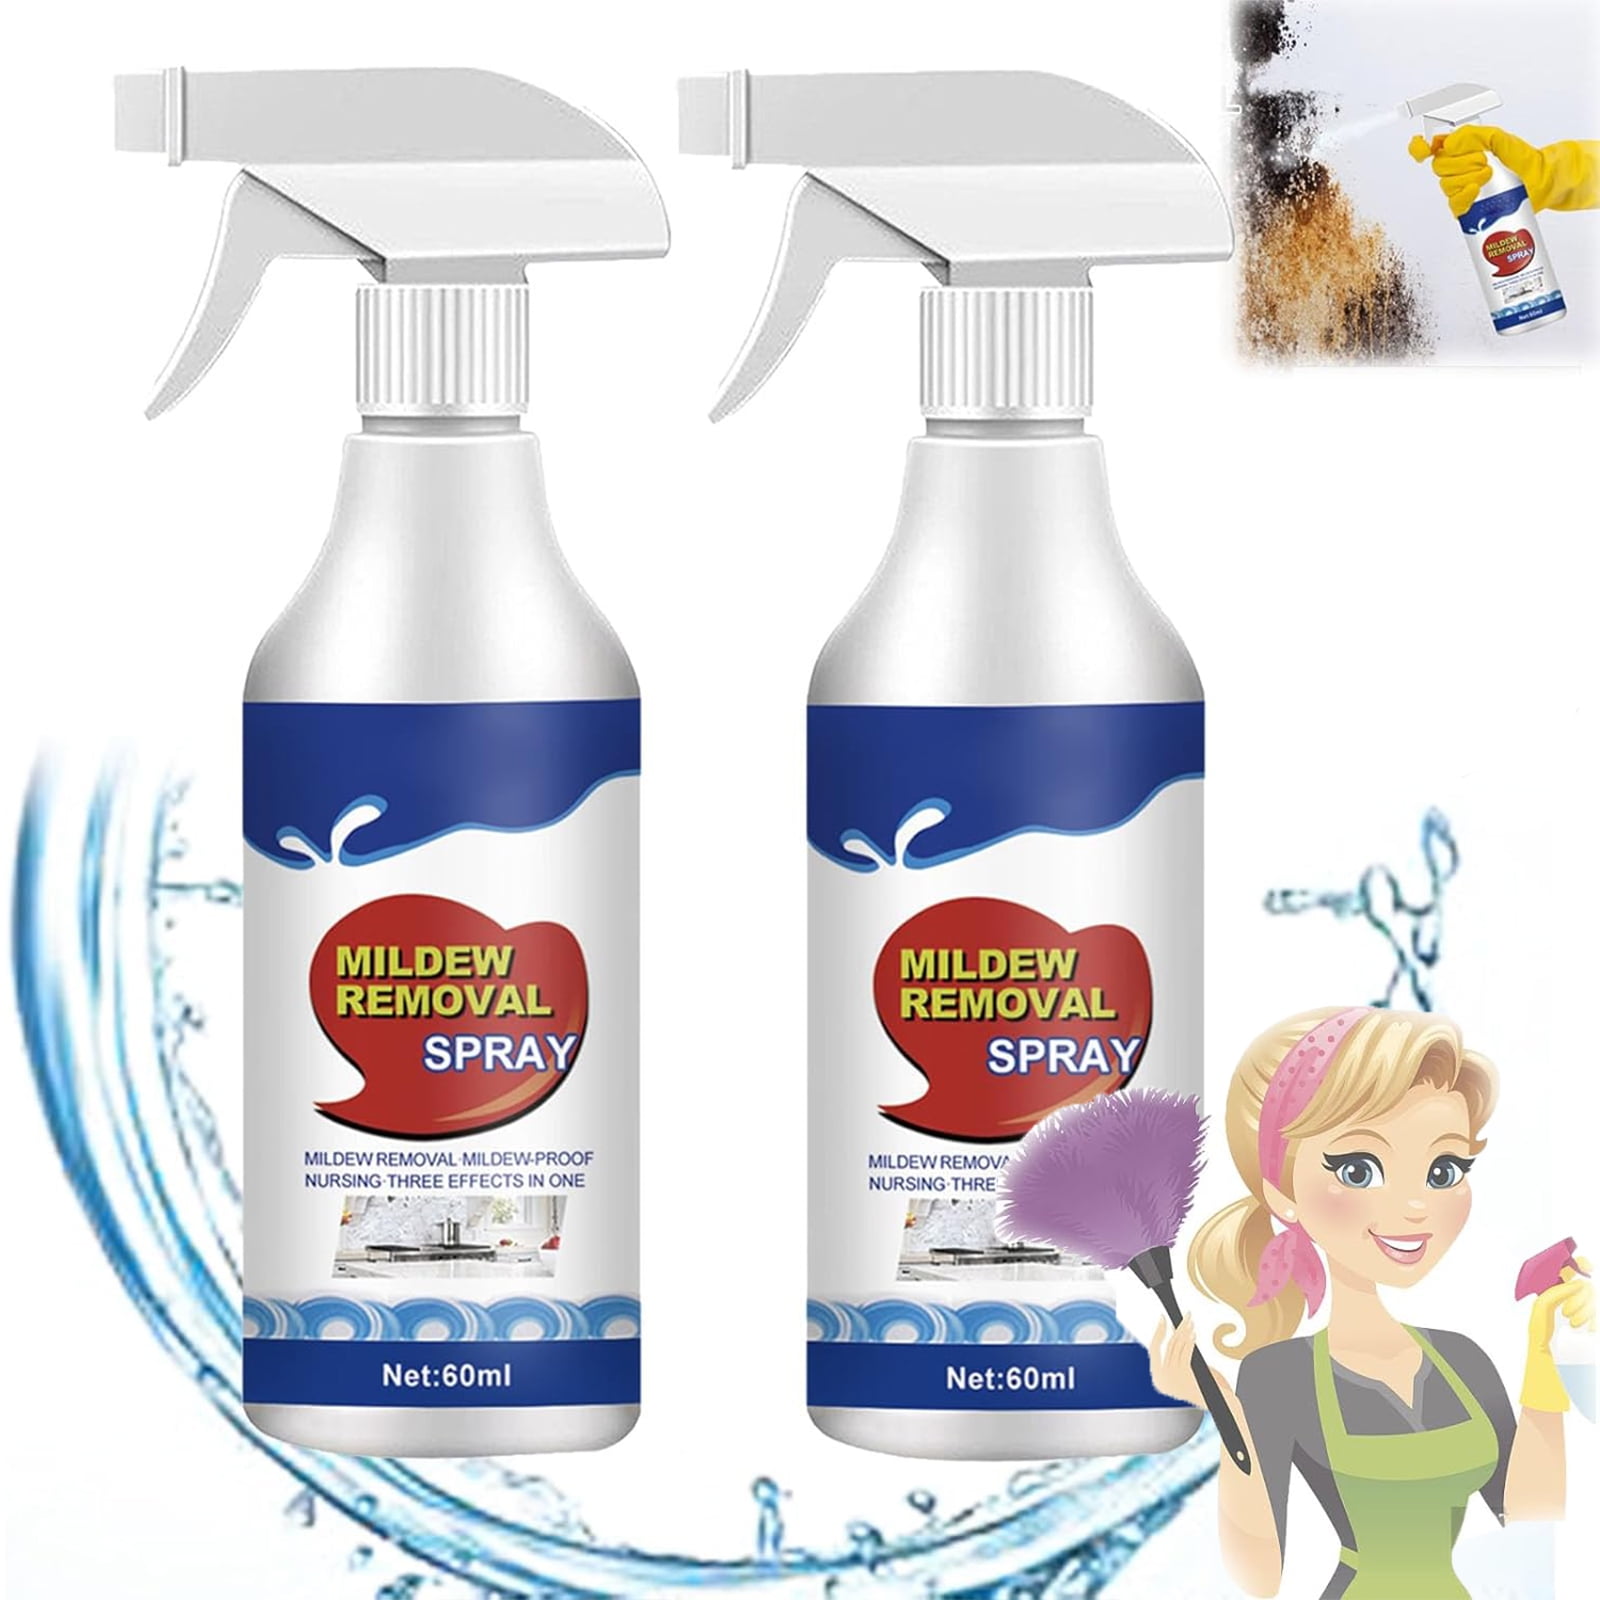 Jue Fish Mildew Removal Spray, Mildew Removal Spray, Mold and Mildew  Remover Bathroom Cleaner, Tile Cleaner for Bathroom Shower, Sink, Bathtubs  and